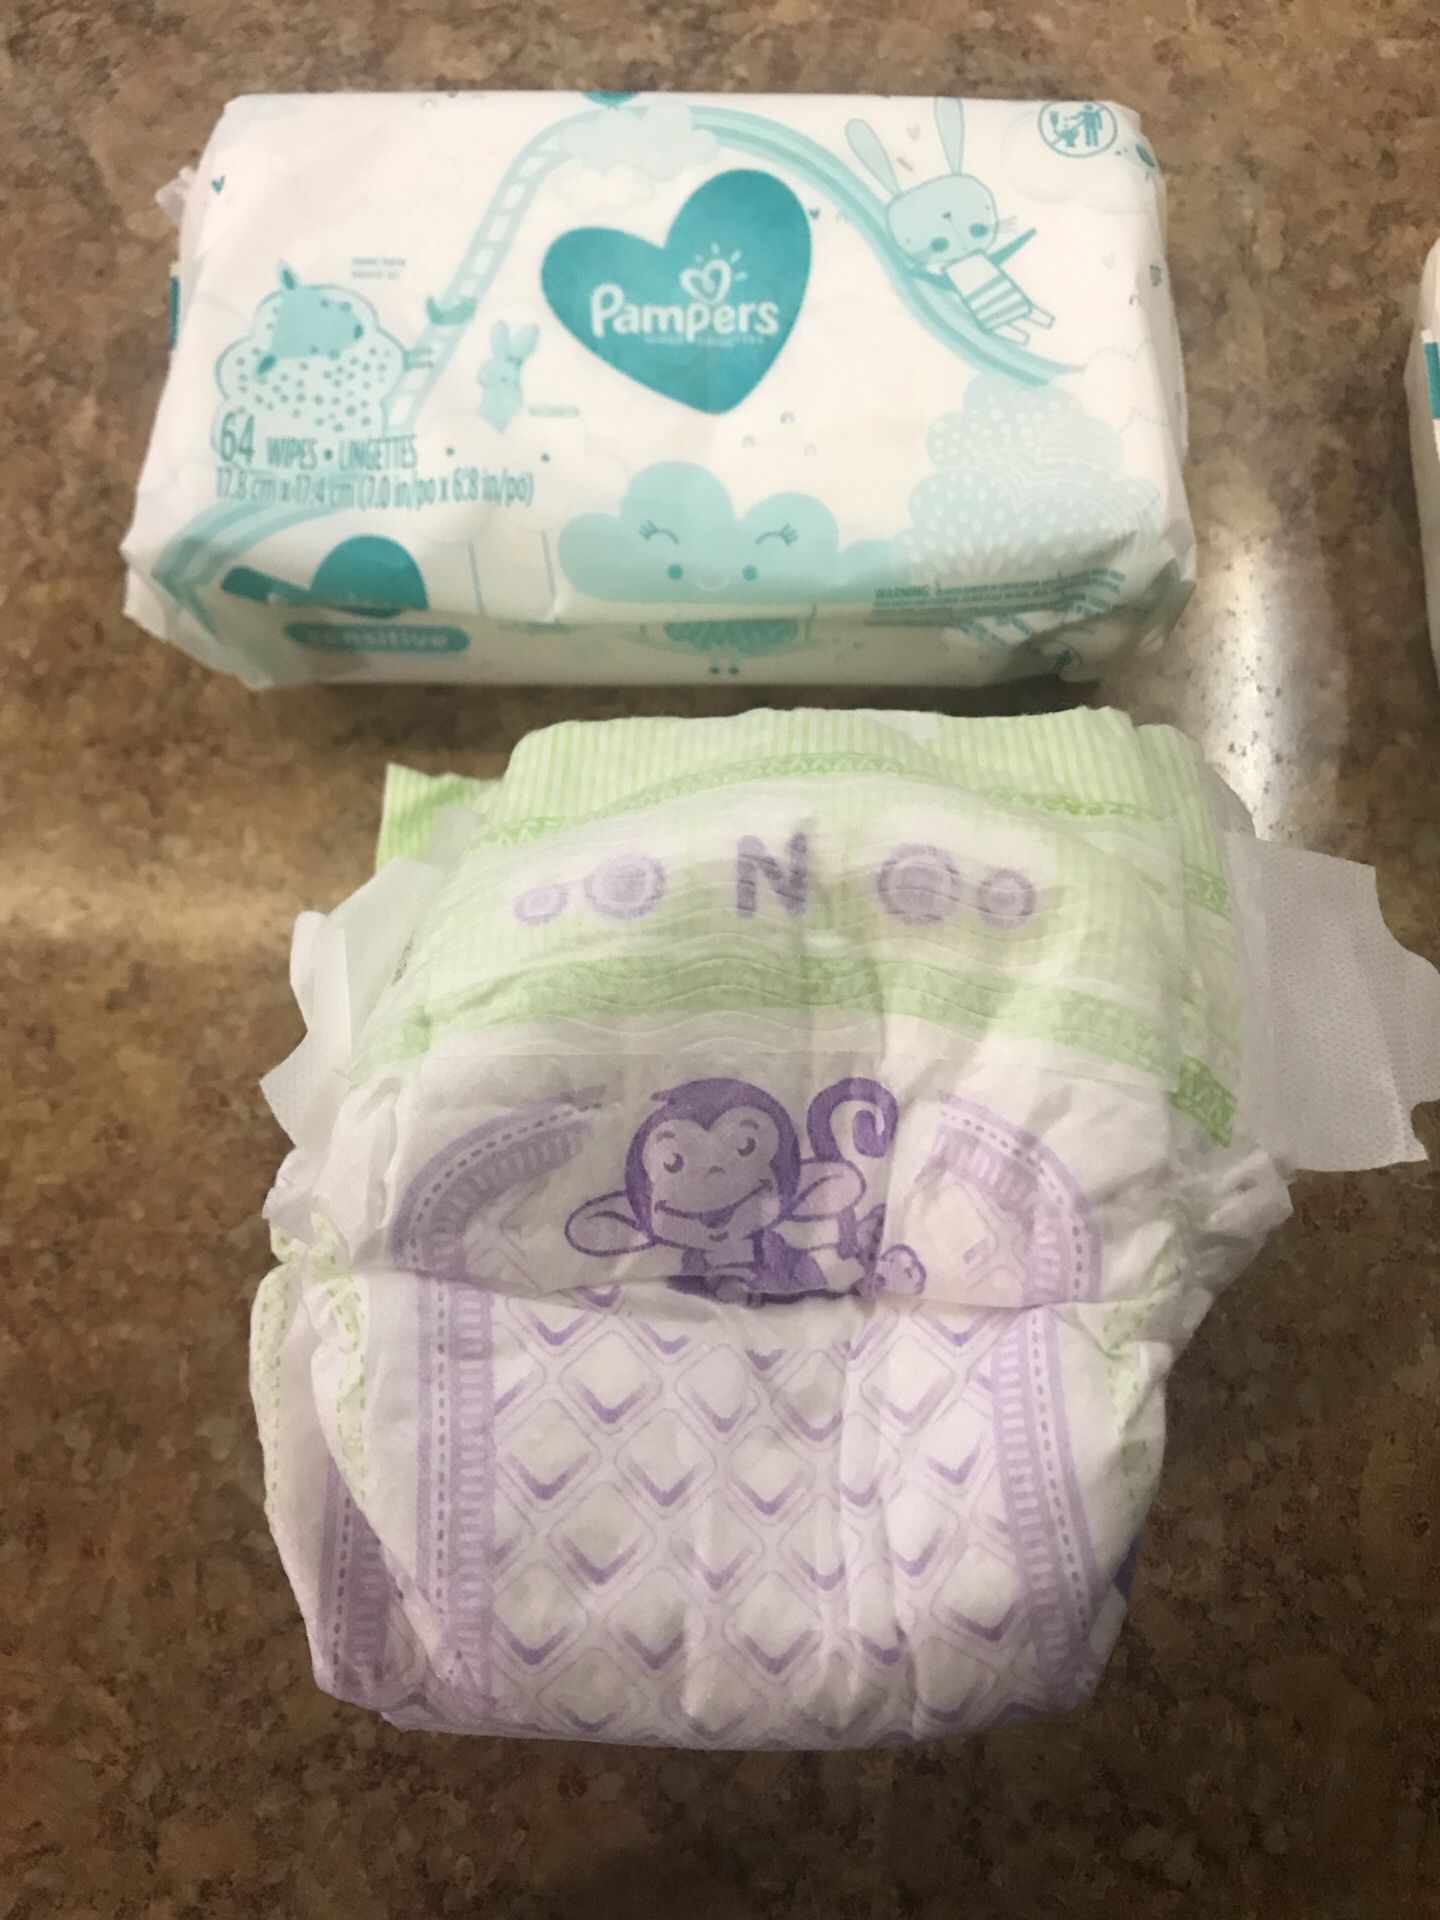 Sensitive pampers wipes and newborn luvs diapers